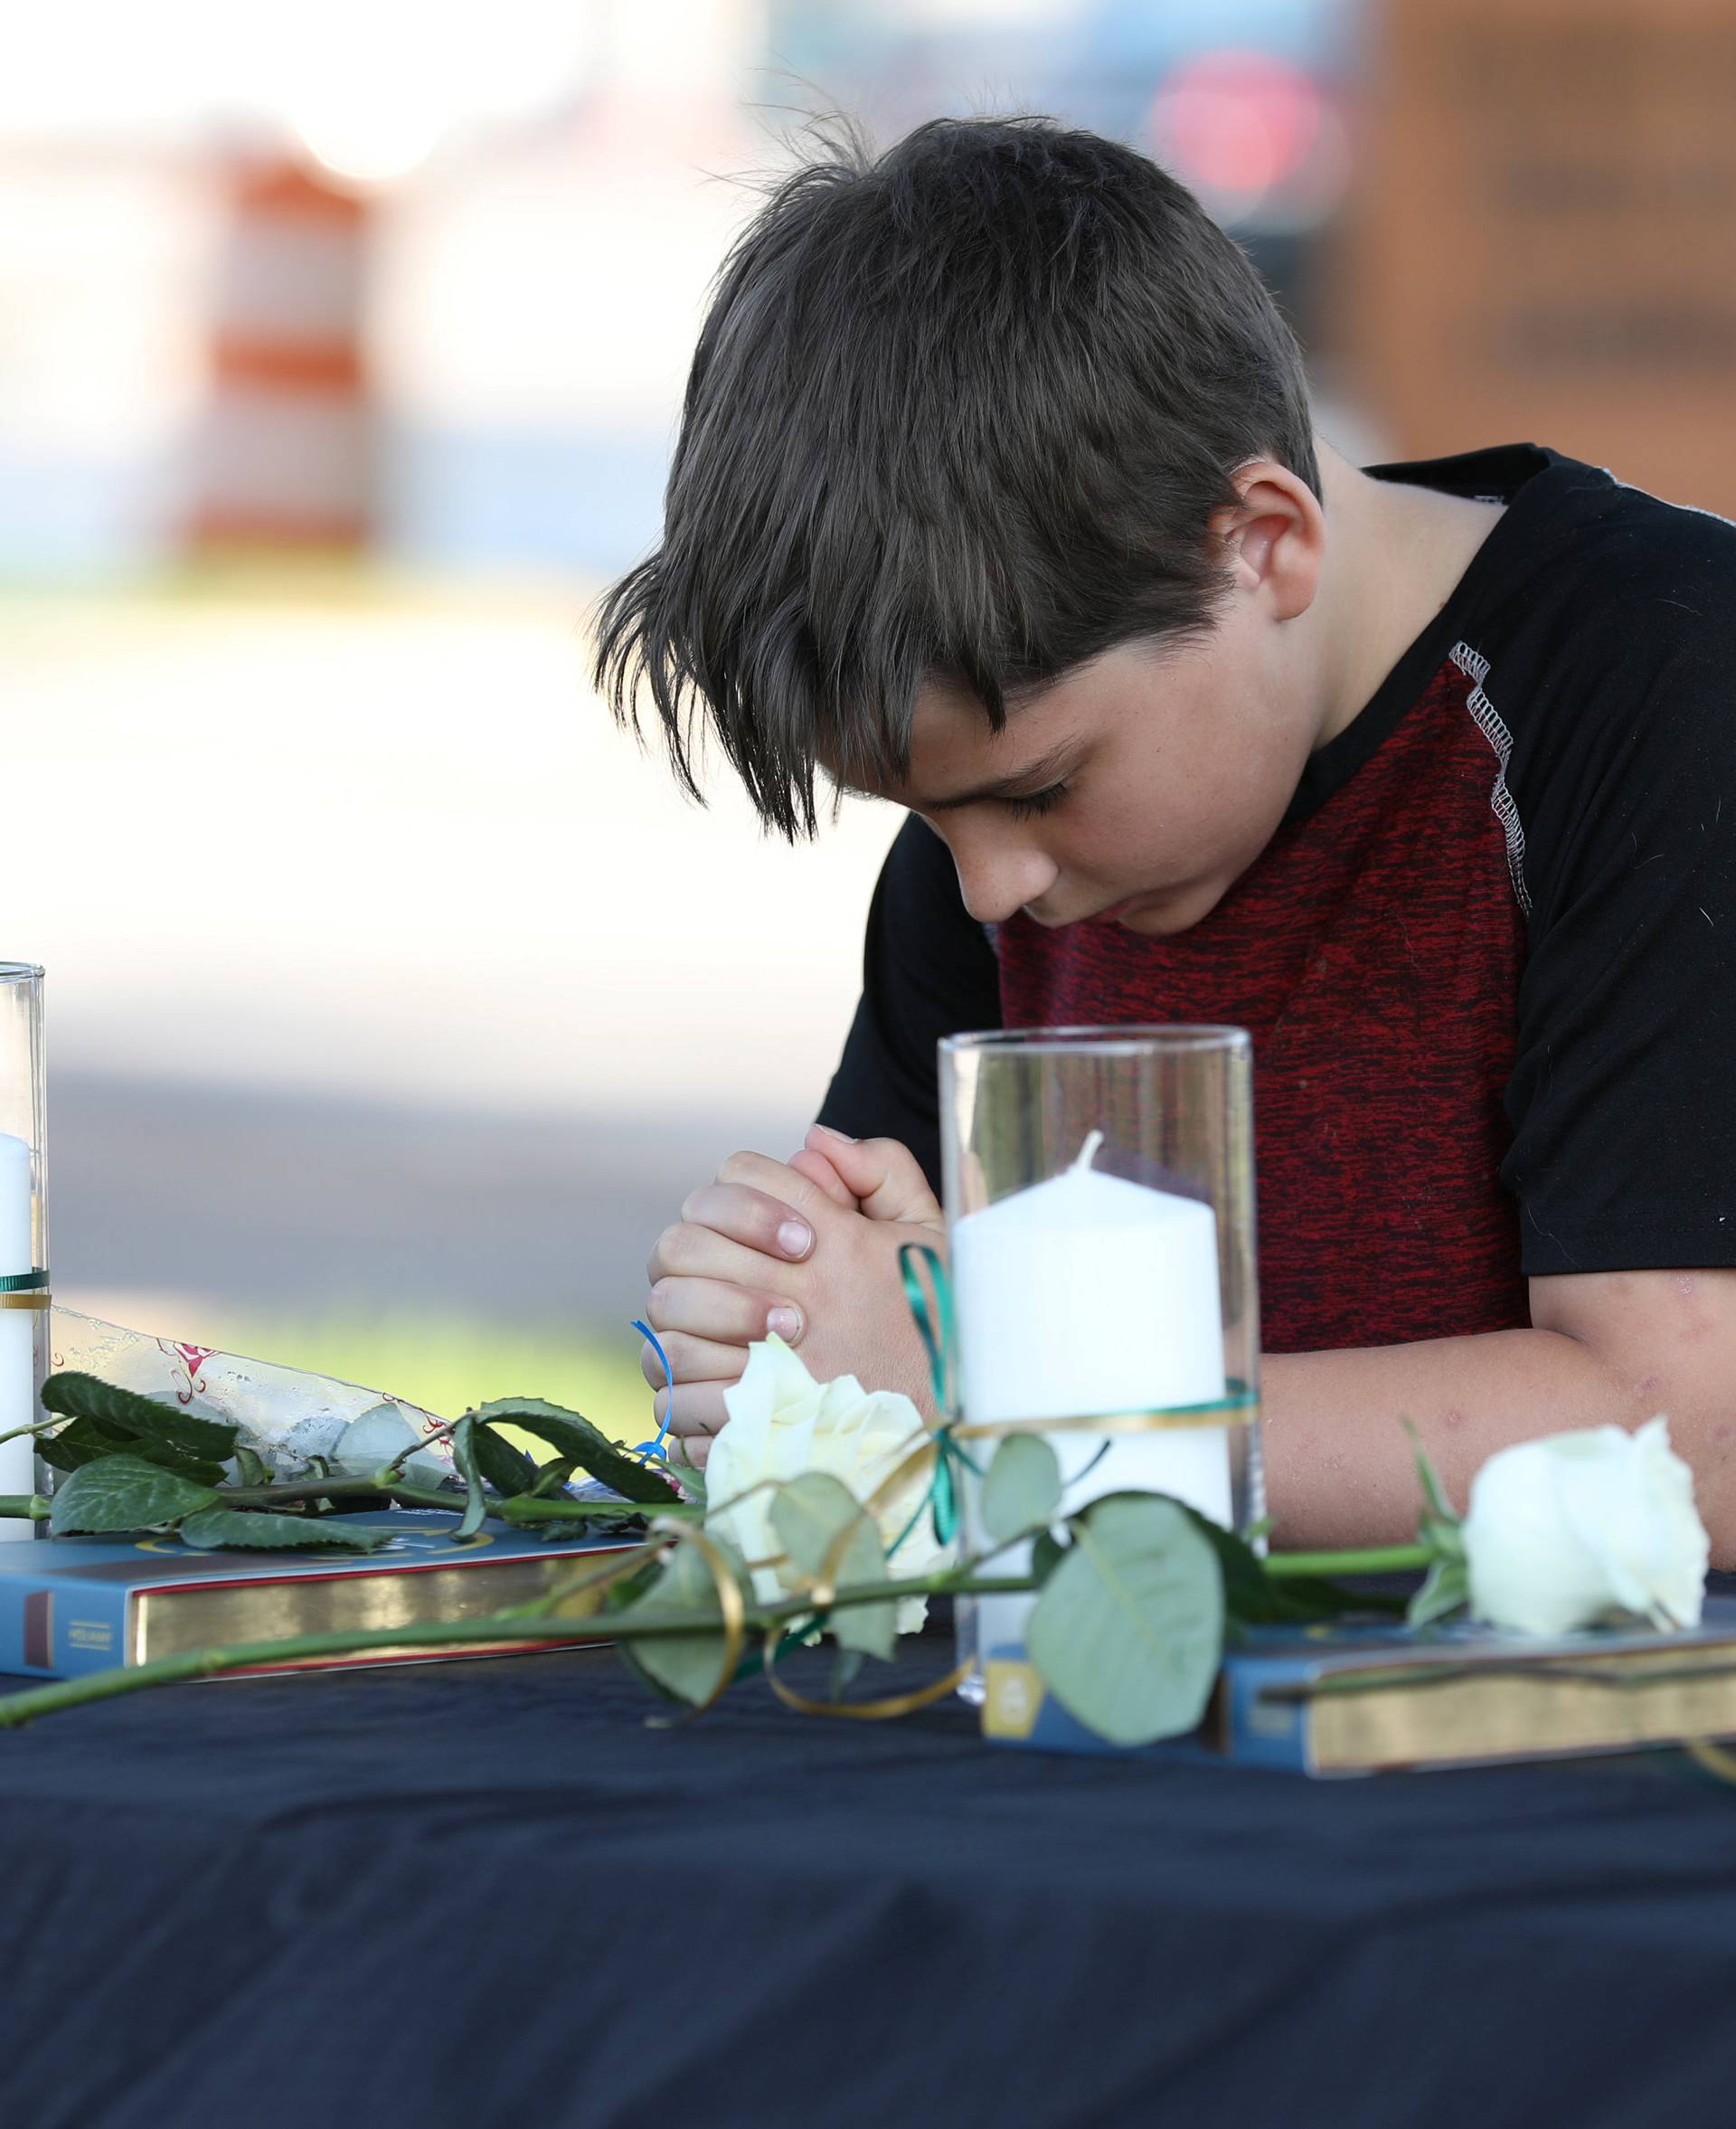 A young boy prays during a vigil held at the Texas First Bank after a shooting left several people dead at Santa Fe High School in Santa Fe, Texas